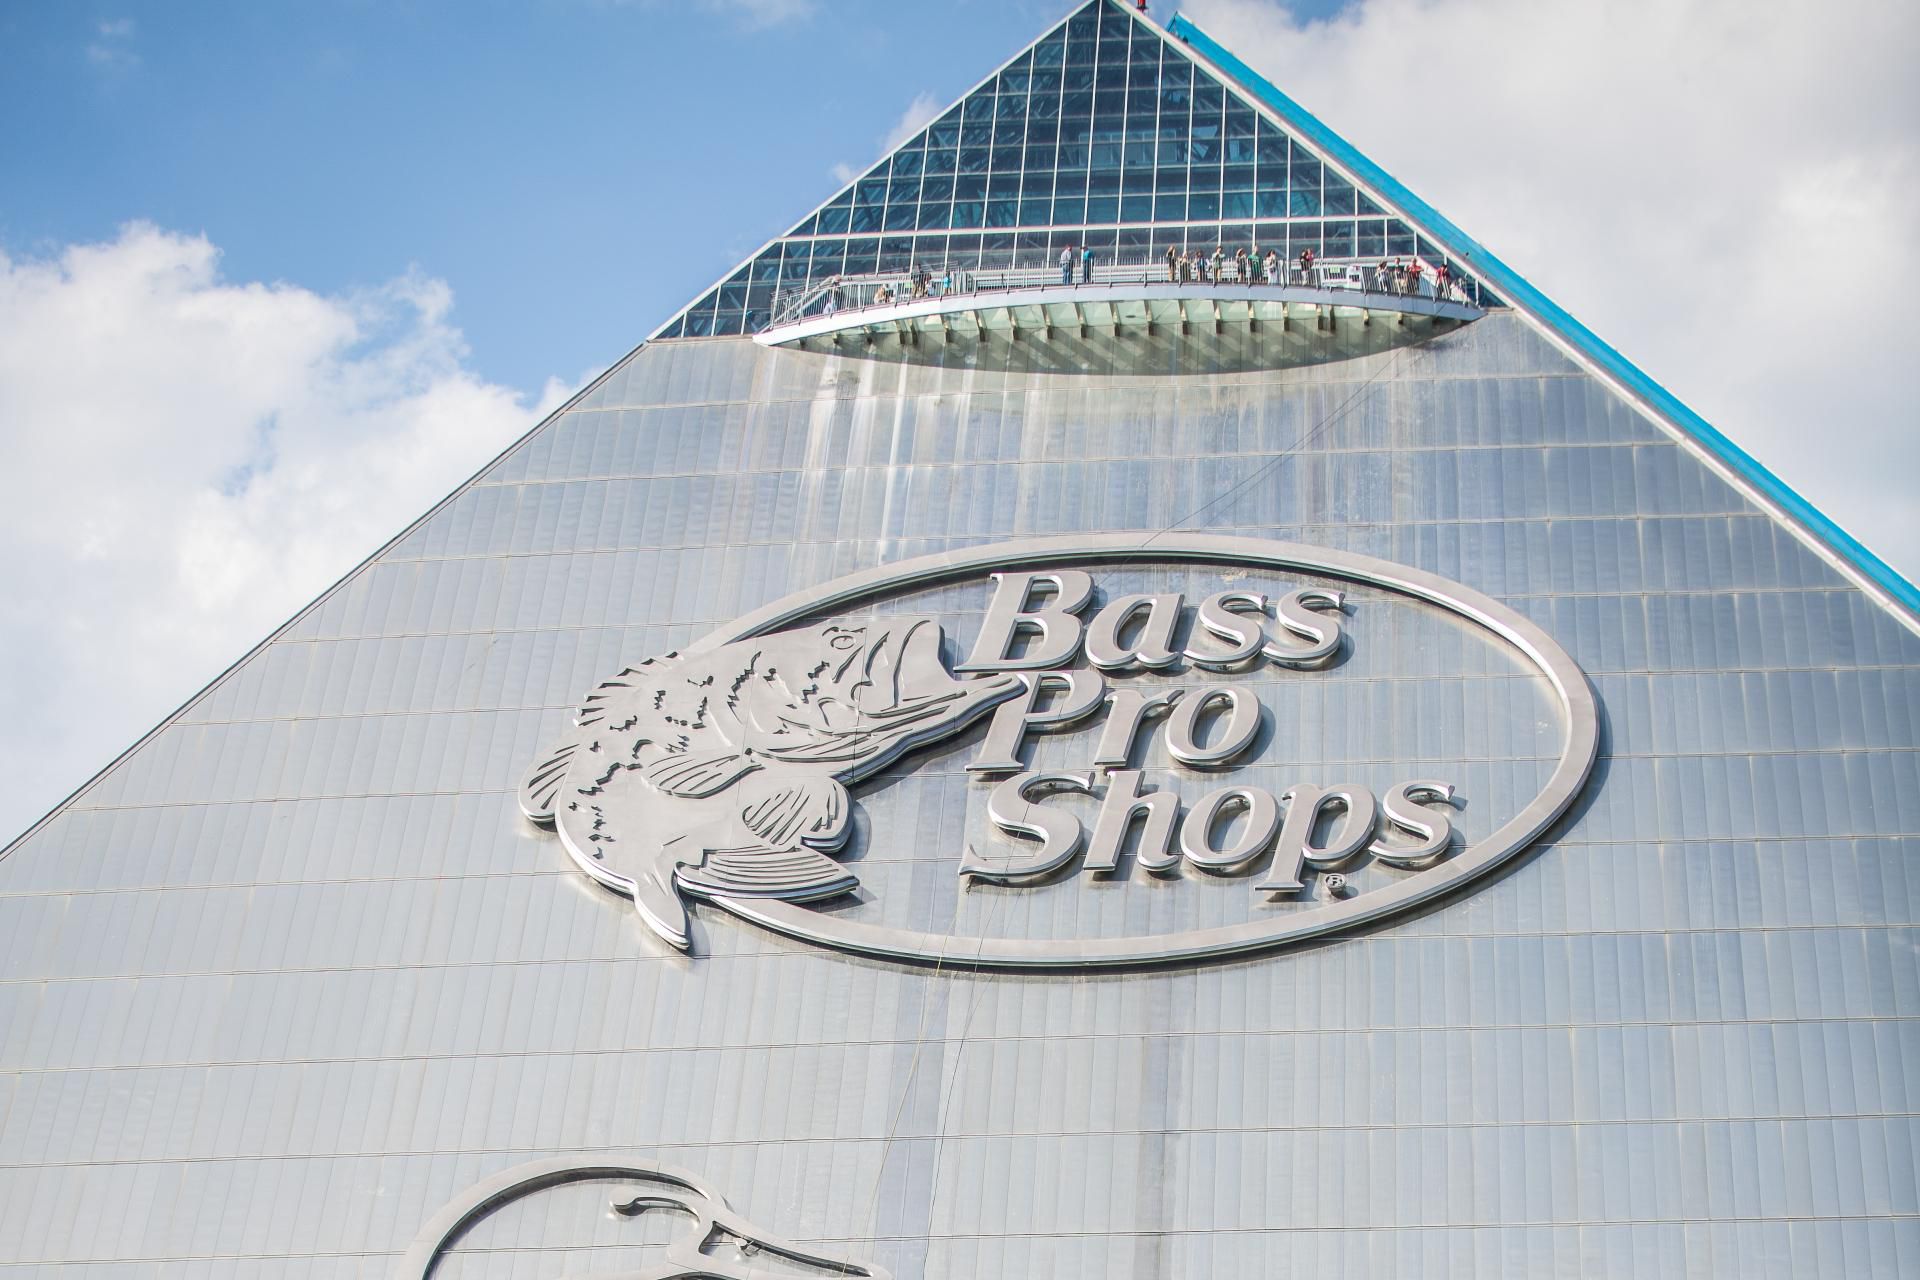 Take our complimentary shuttle to Bass Pro Shops at the Pyramid